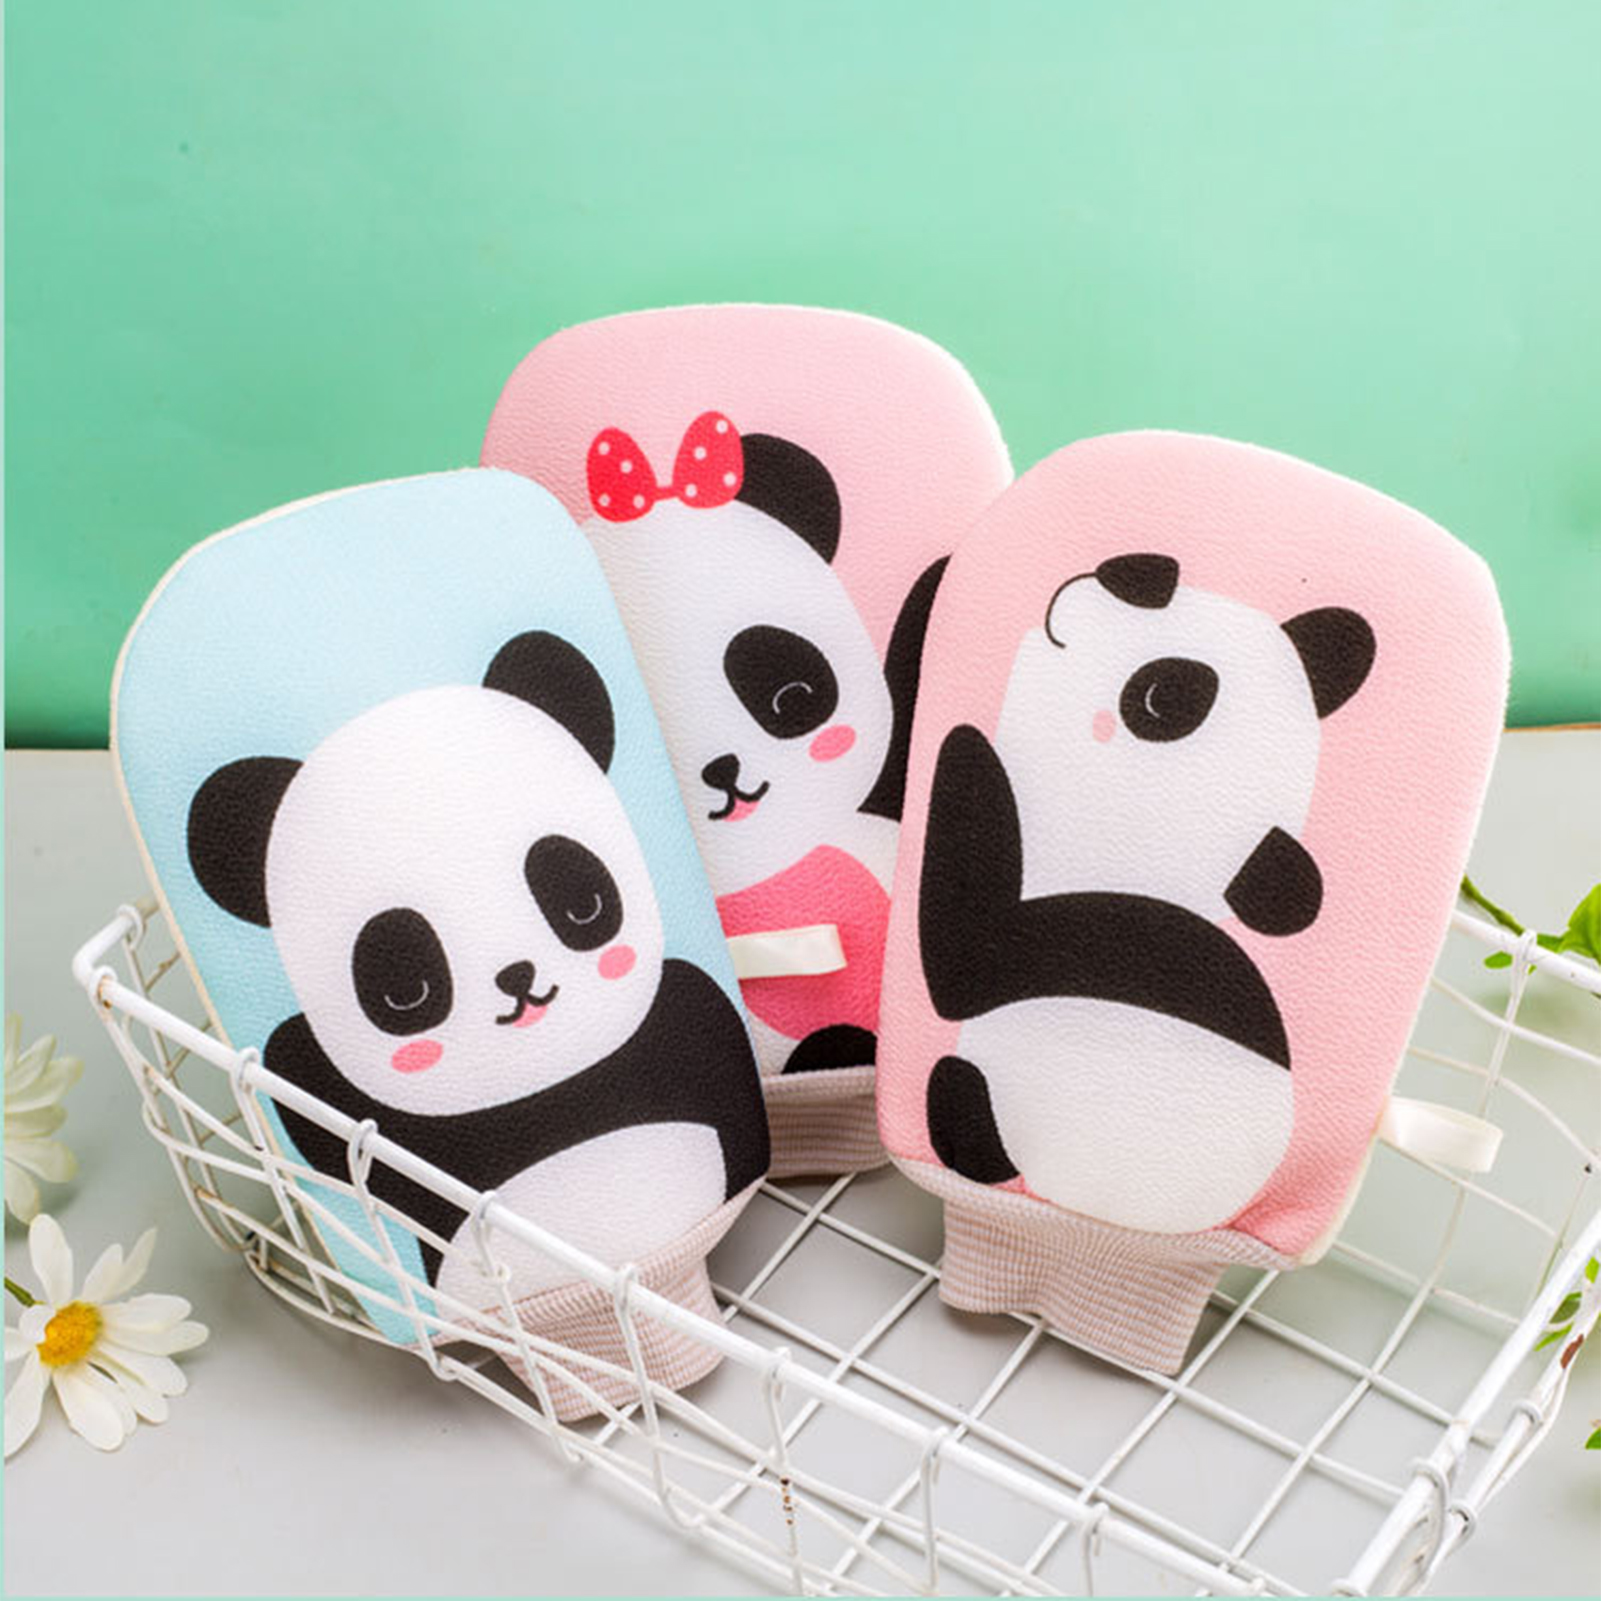 Cute Panda Exfoliating Shower Gloves Bath Massage Cleaning Tool for Body Bathroom Accessories